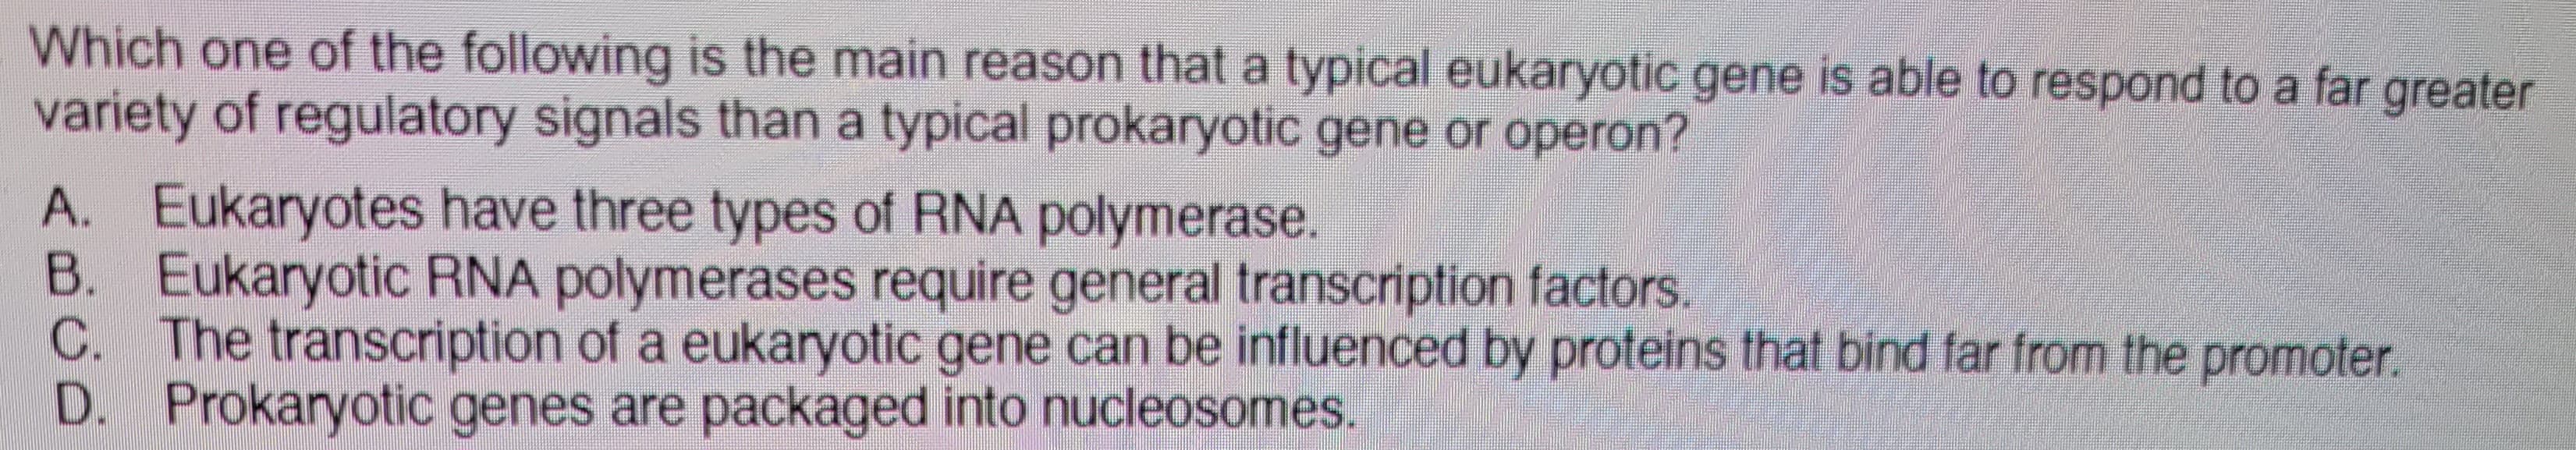 Which one of the following is the main reason that a typical eukaryotic gene is able to respond to a far greater
variety of regulatory signals than a typical prokaryotic gene or operon?
A. Eukaryotes have three types of RNA polymerase.
B. Eukaryotic RNA polymerases require general transcription factors.
C. The transcription of a eukaryotic gene can be influenced by proteins that bind far from the promoter.
D. Prokaryotic genes are packaged into nucleosomes.